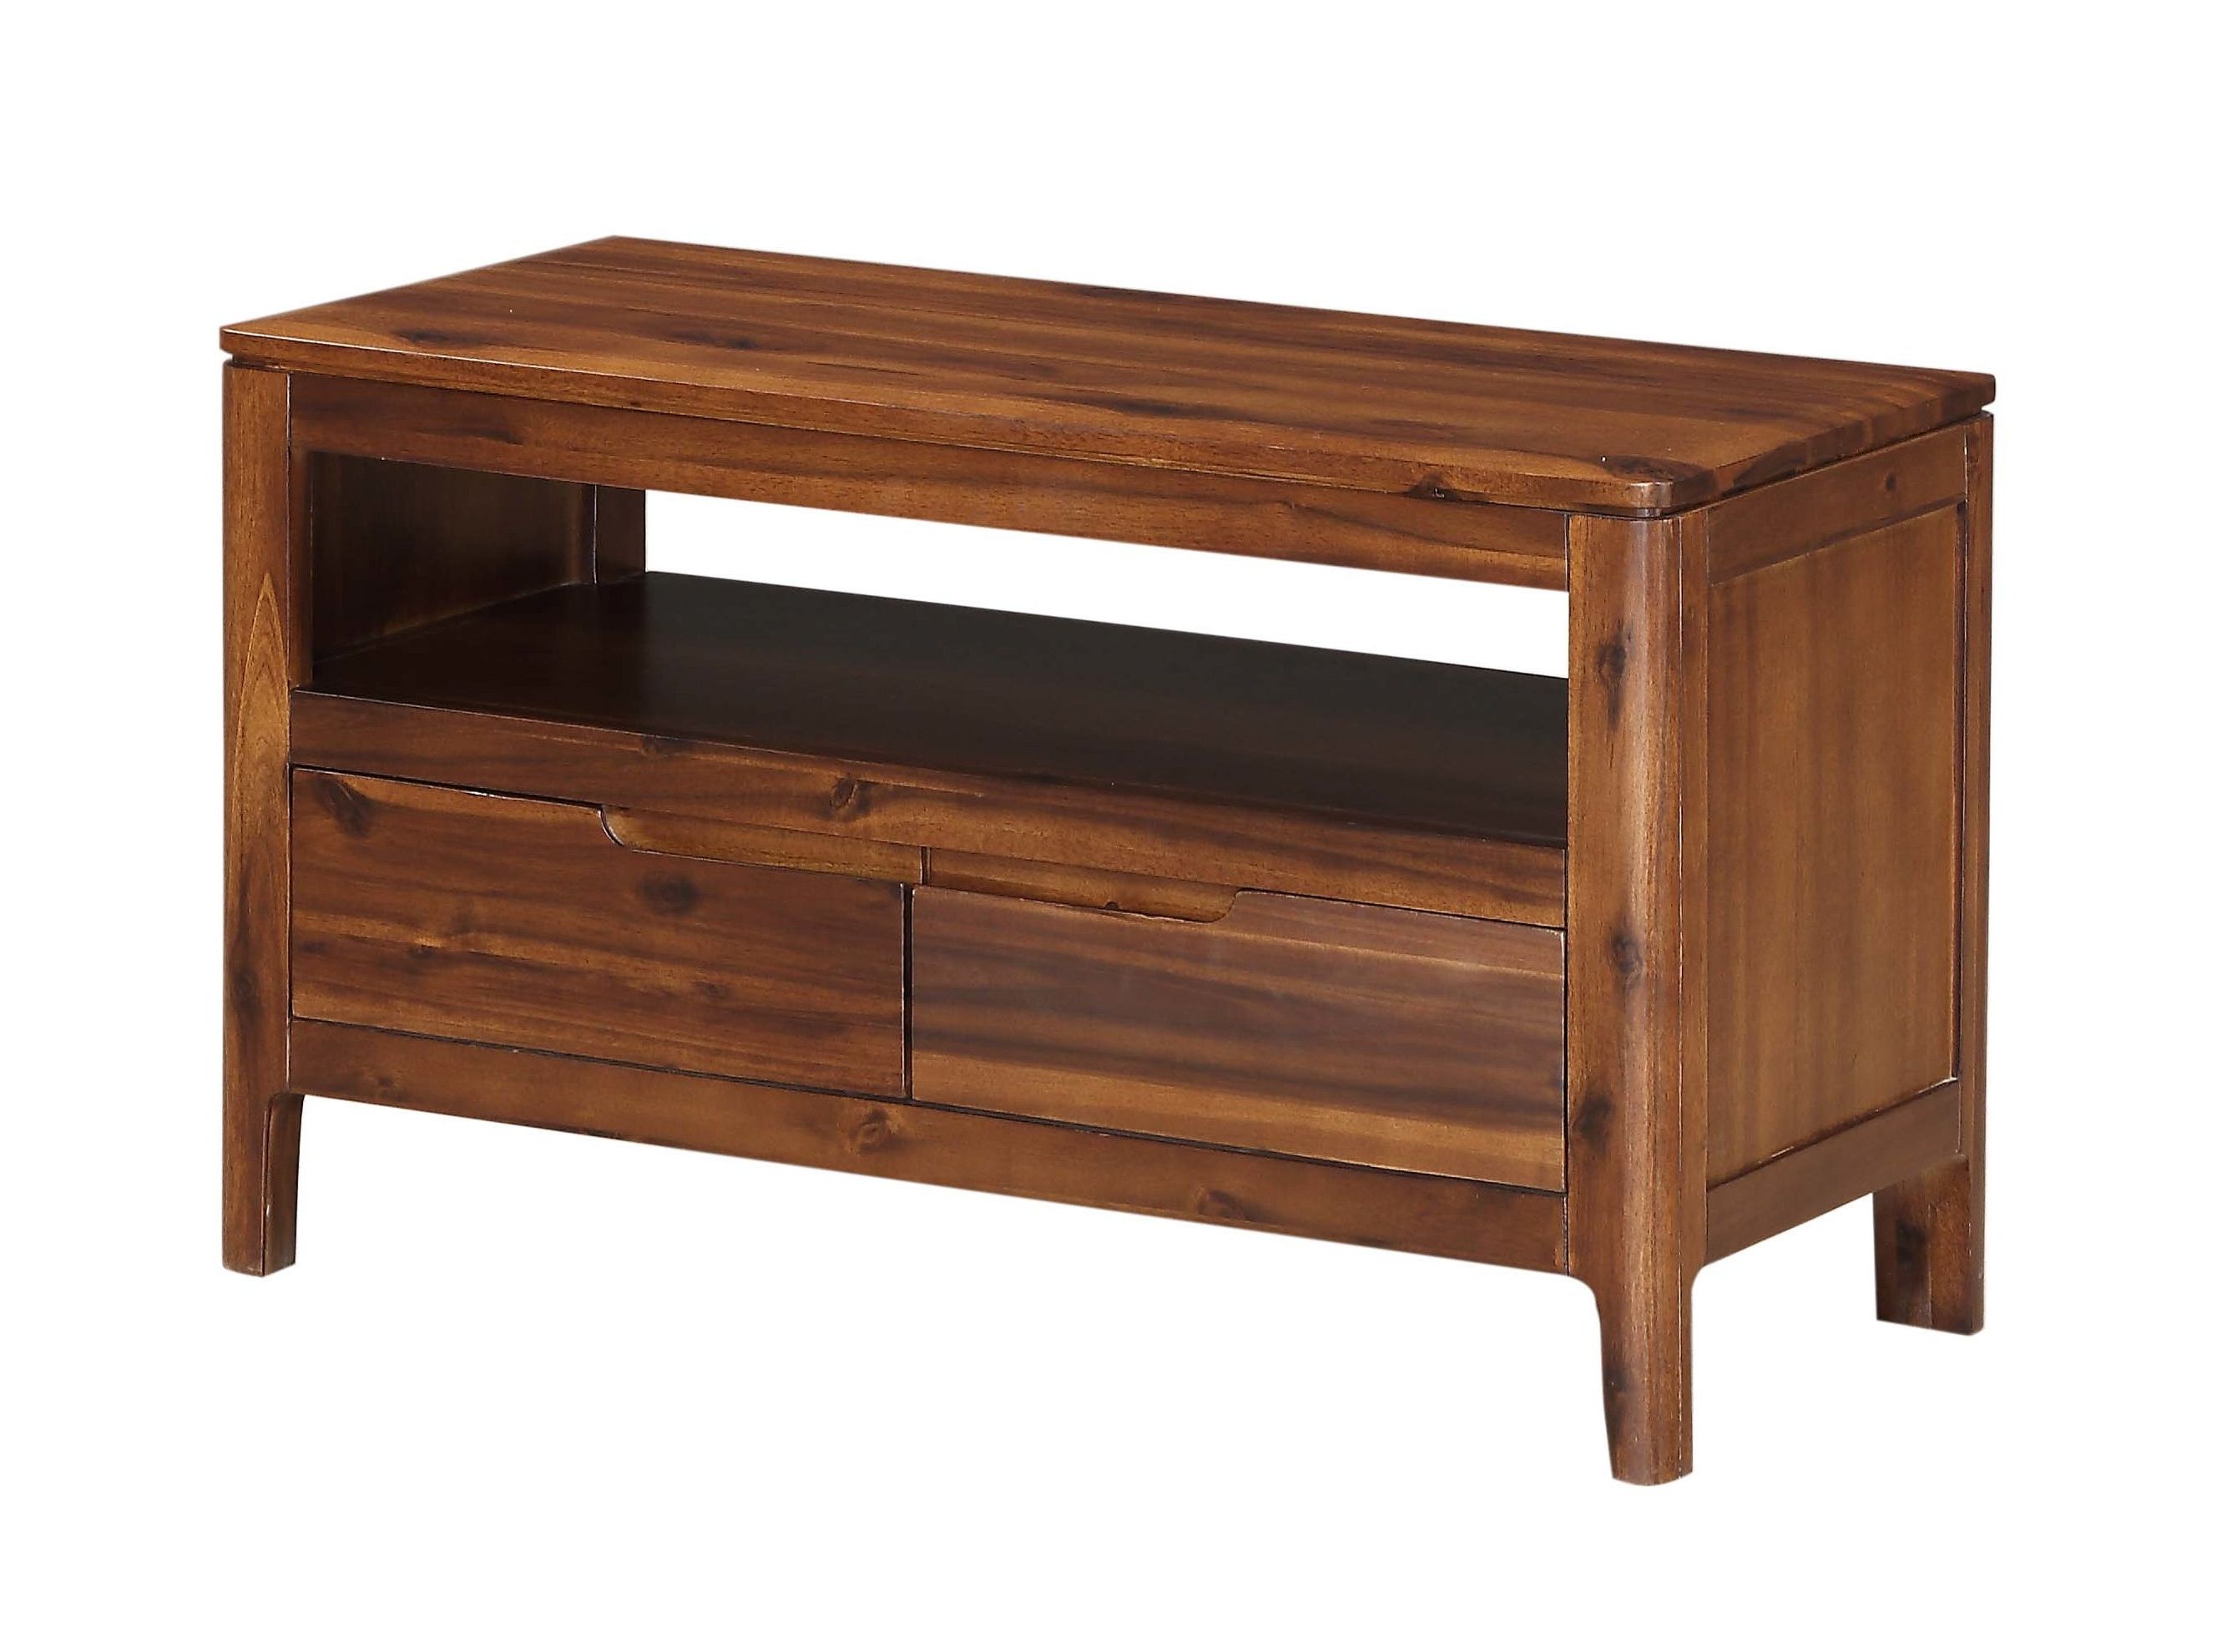 Acacia Tv Stands & Entertainment Units You'll Love | Wayfair.co.uk Within Vista 60 Inch Tv Stands (Gallery 6 of 20)